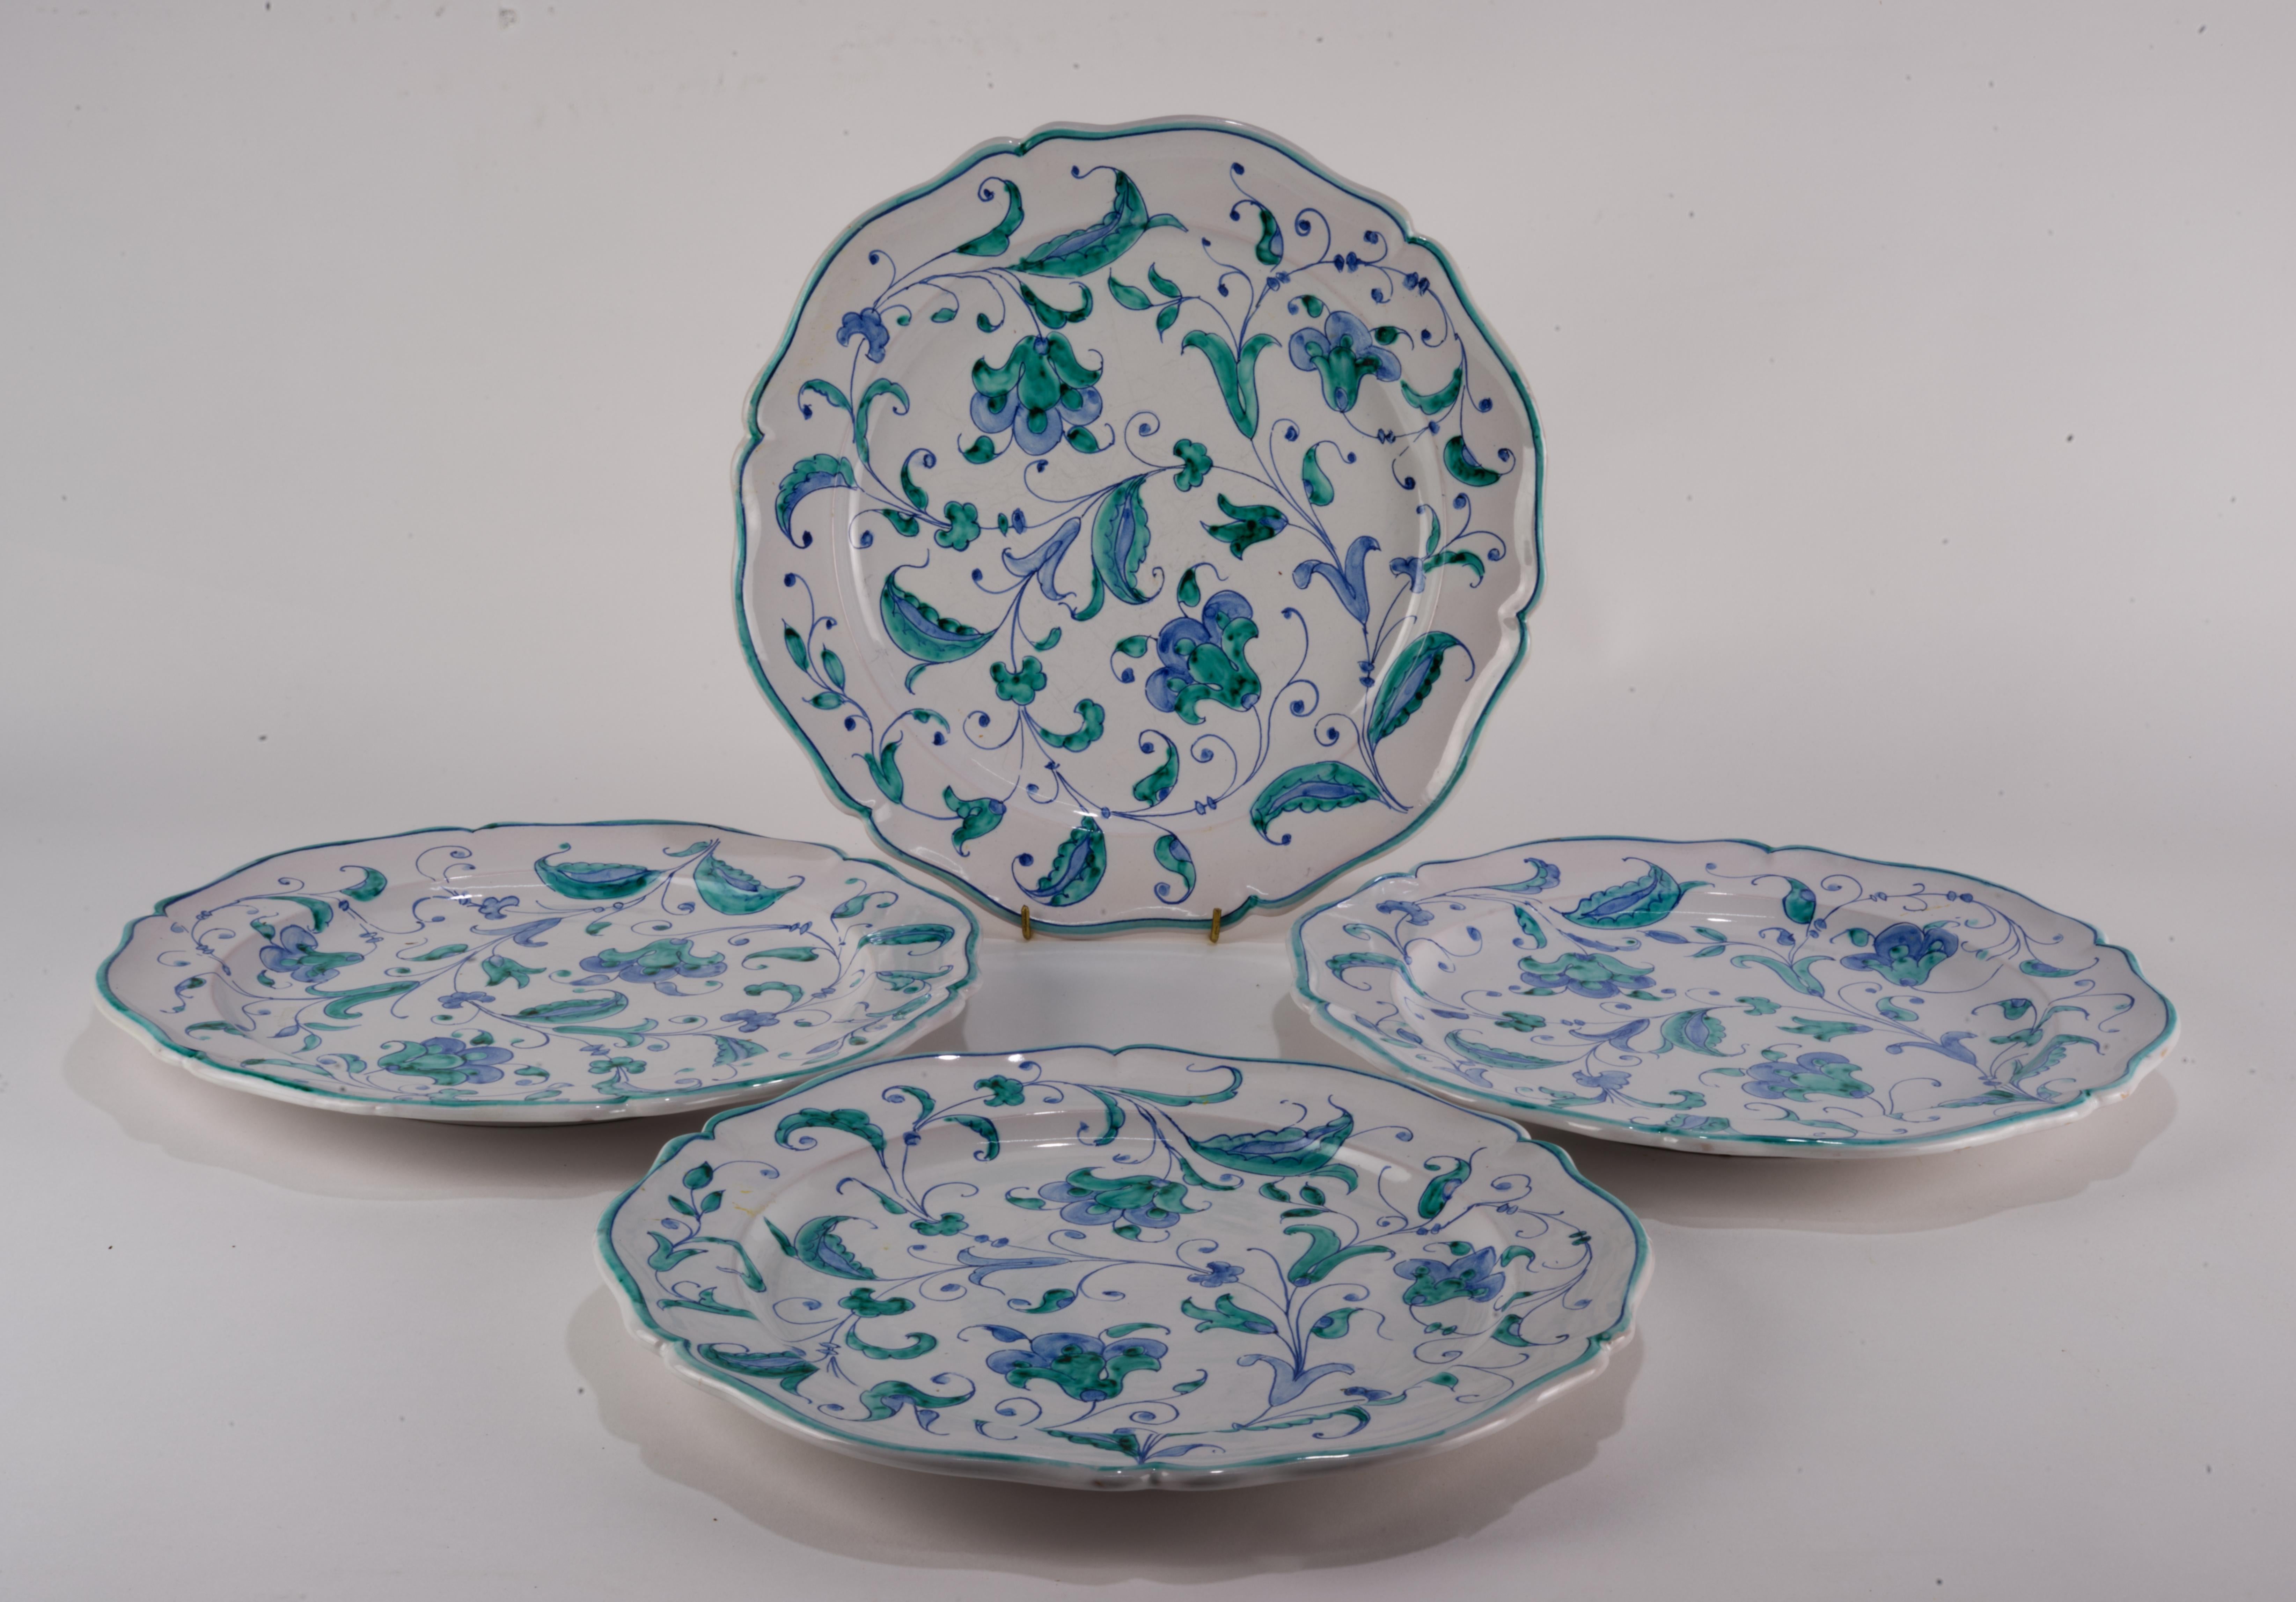 
Set of 4 dinner plates was made in Florence, Italy by Società Anonima Ceramiche Zaccagnini. The plates are decorated in traditional style with teal and blue plant-based pattern on white background and elegant ornamental rim.

The plates are signed